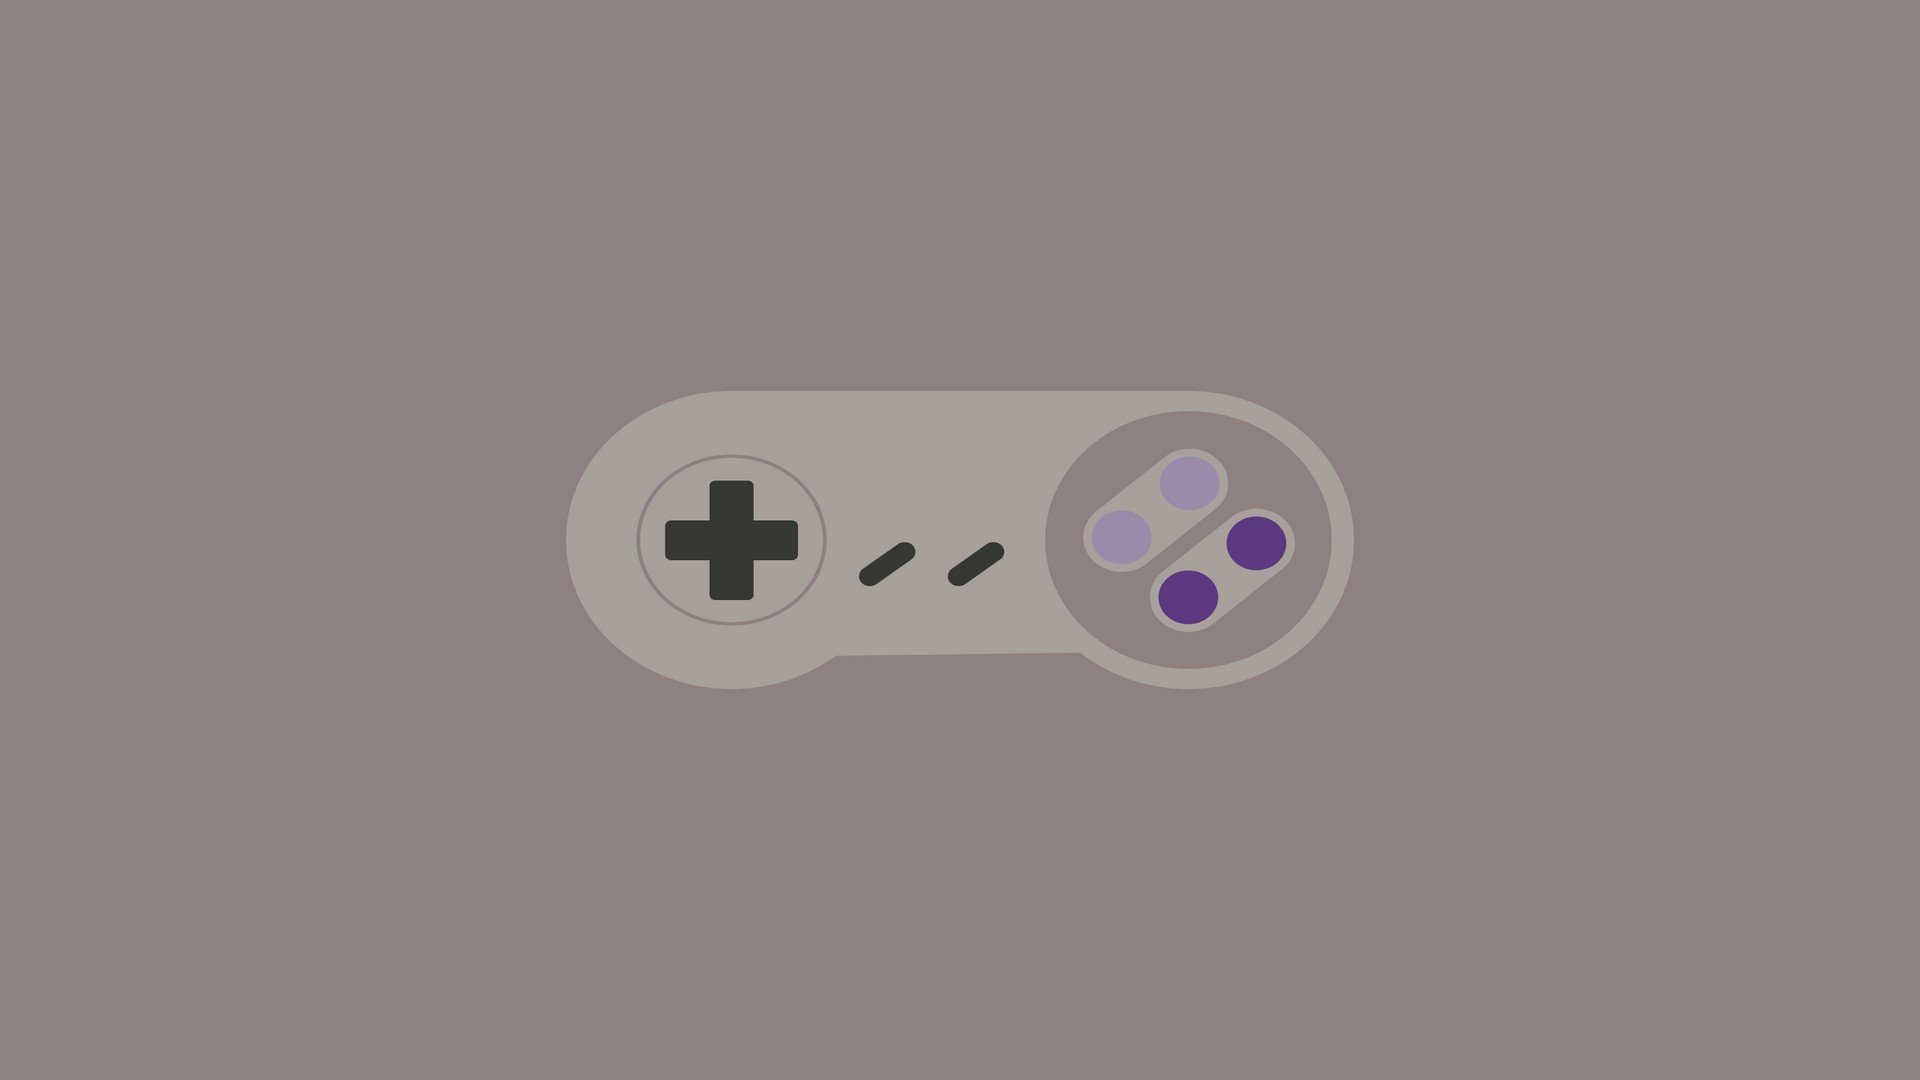 General 1920x1080 controllers minimalism video game art video games Super Famicom simple background gray gray background SNES